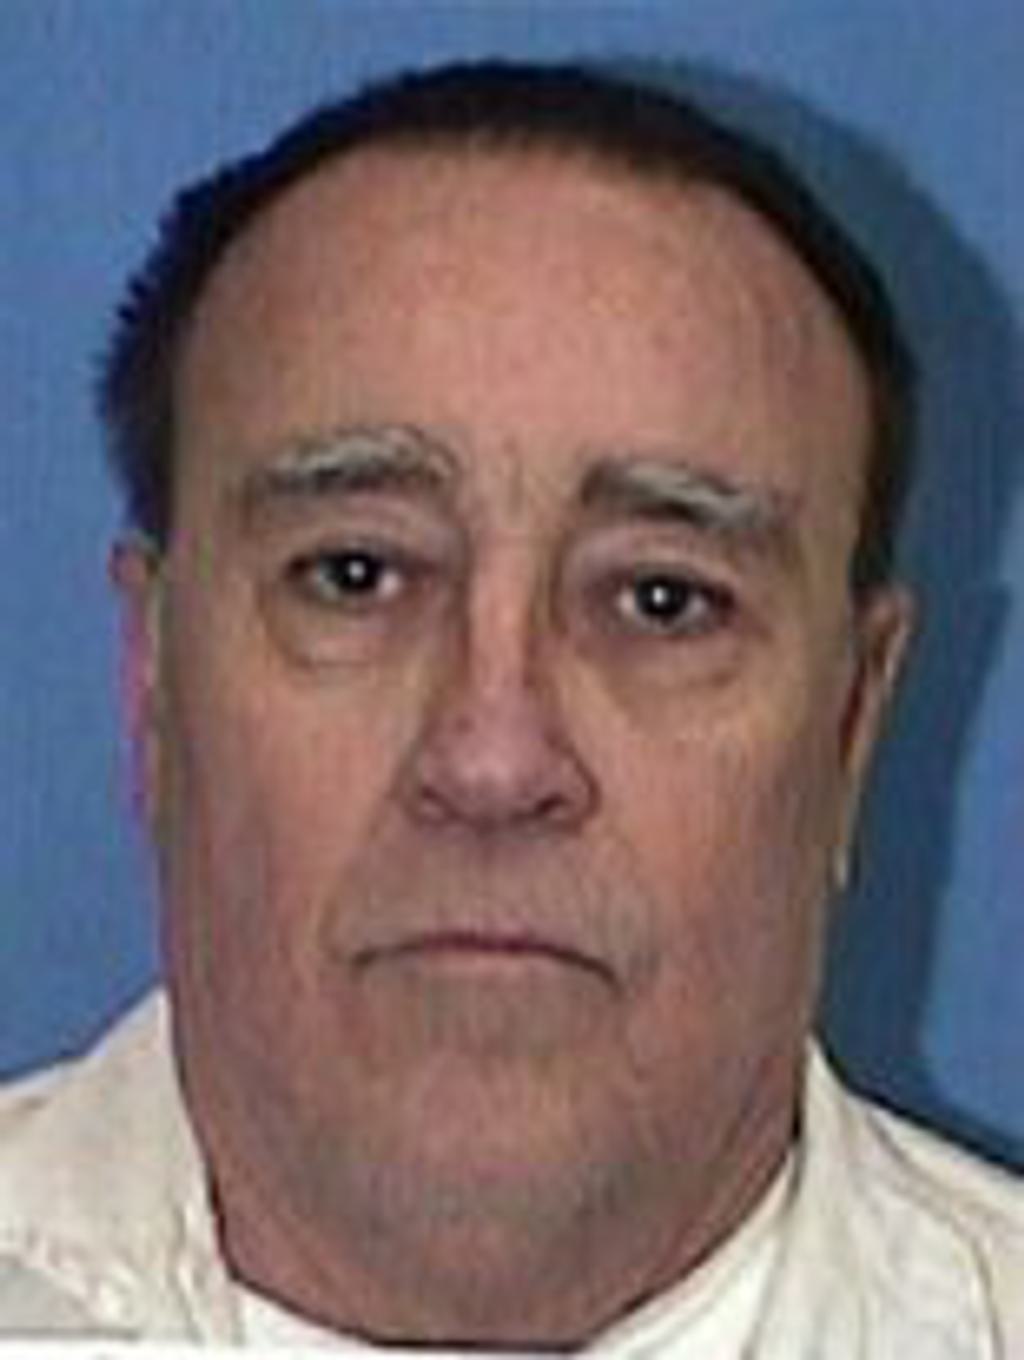 DNA Evidence Could Show If Texas Executed an Innocent Man